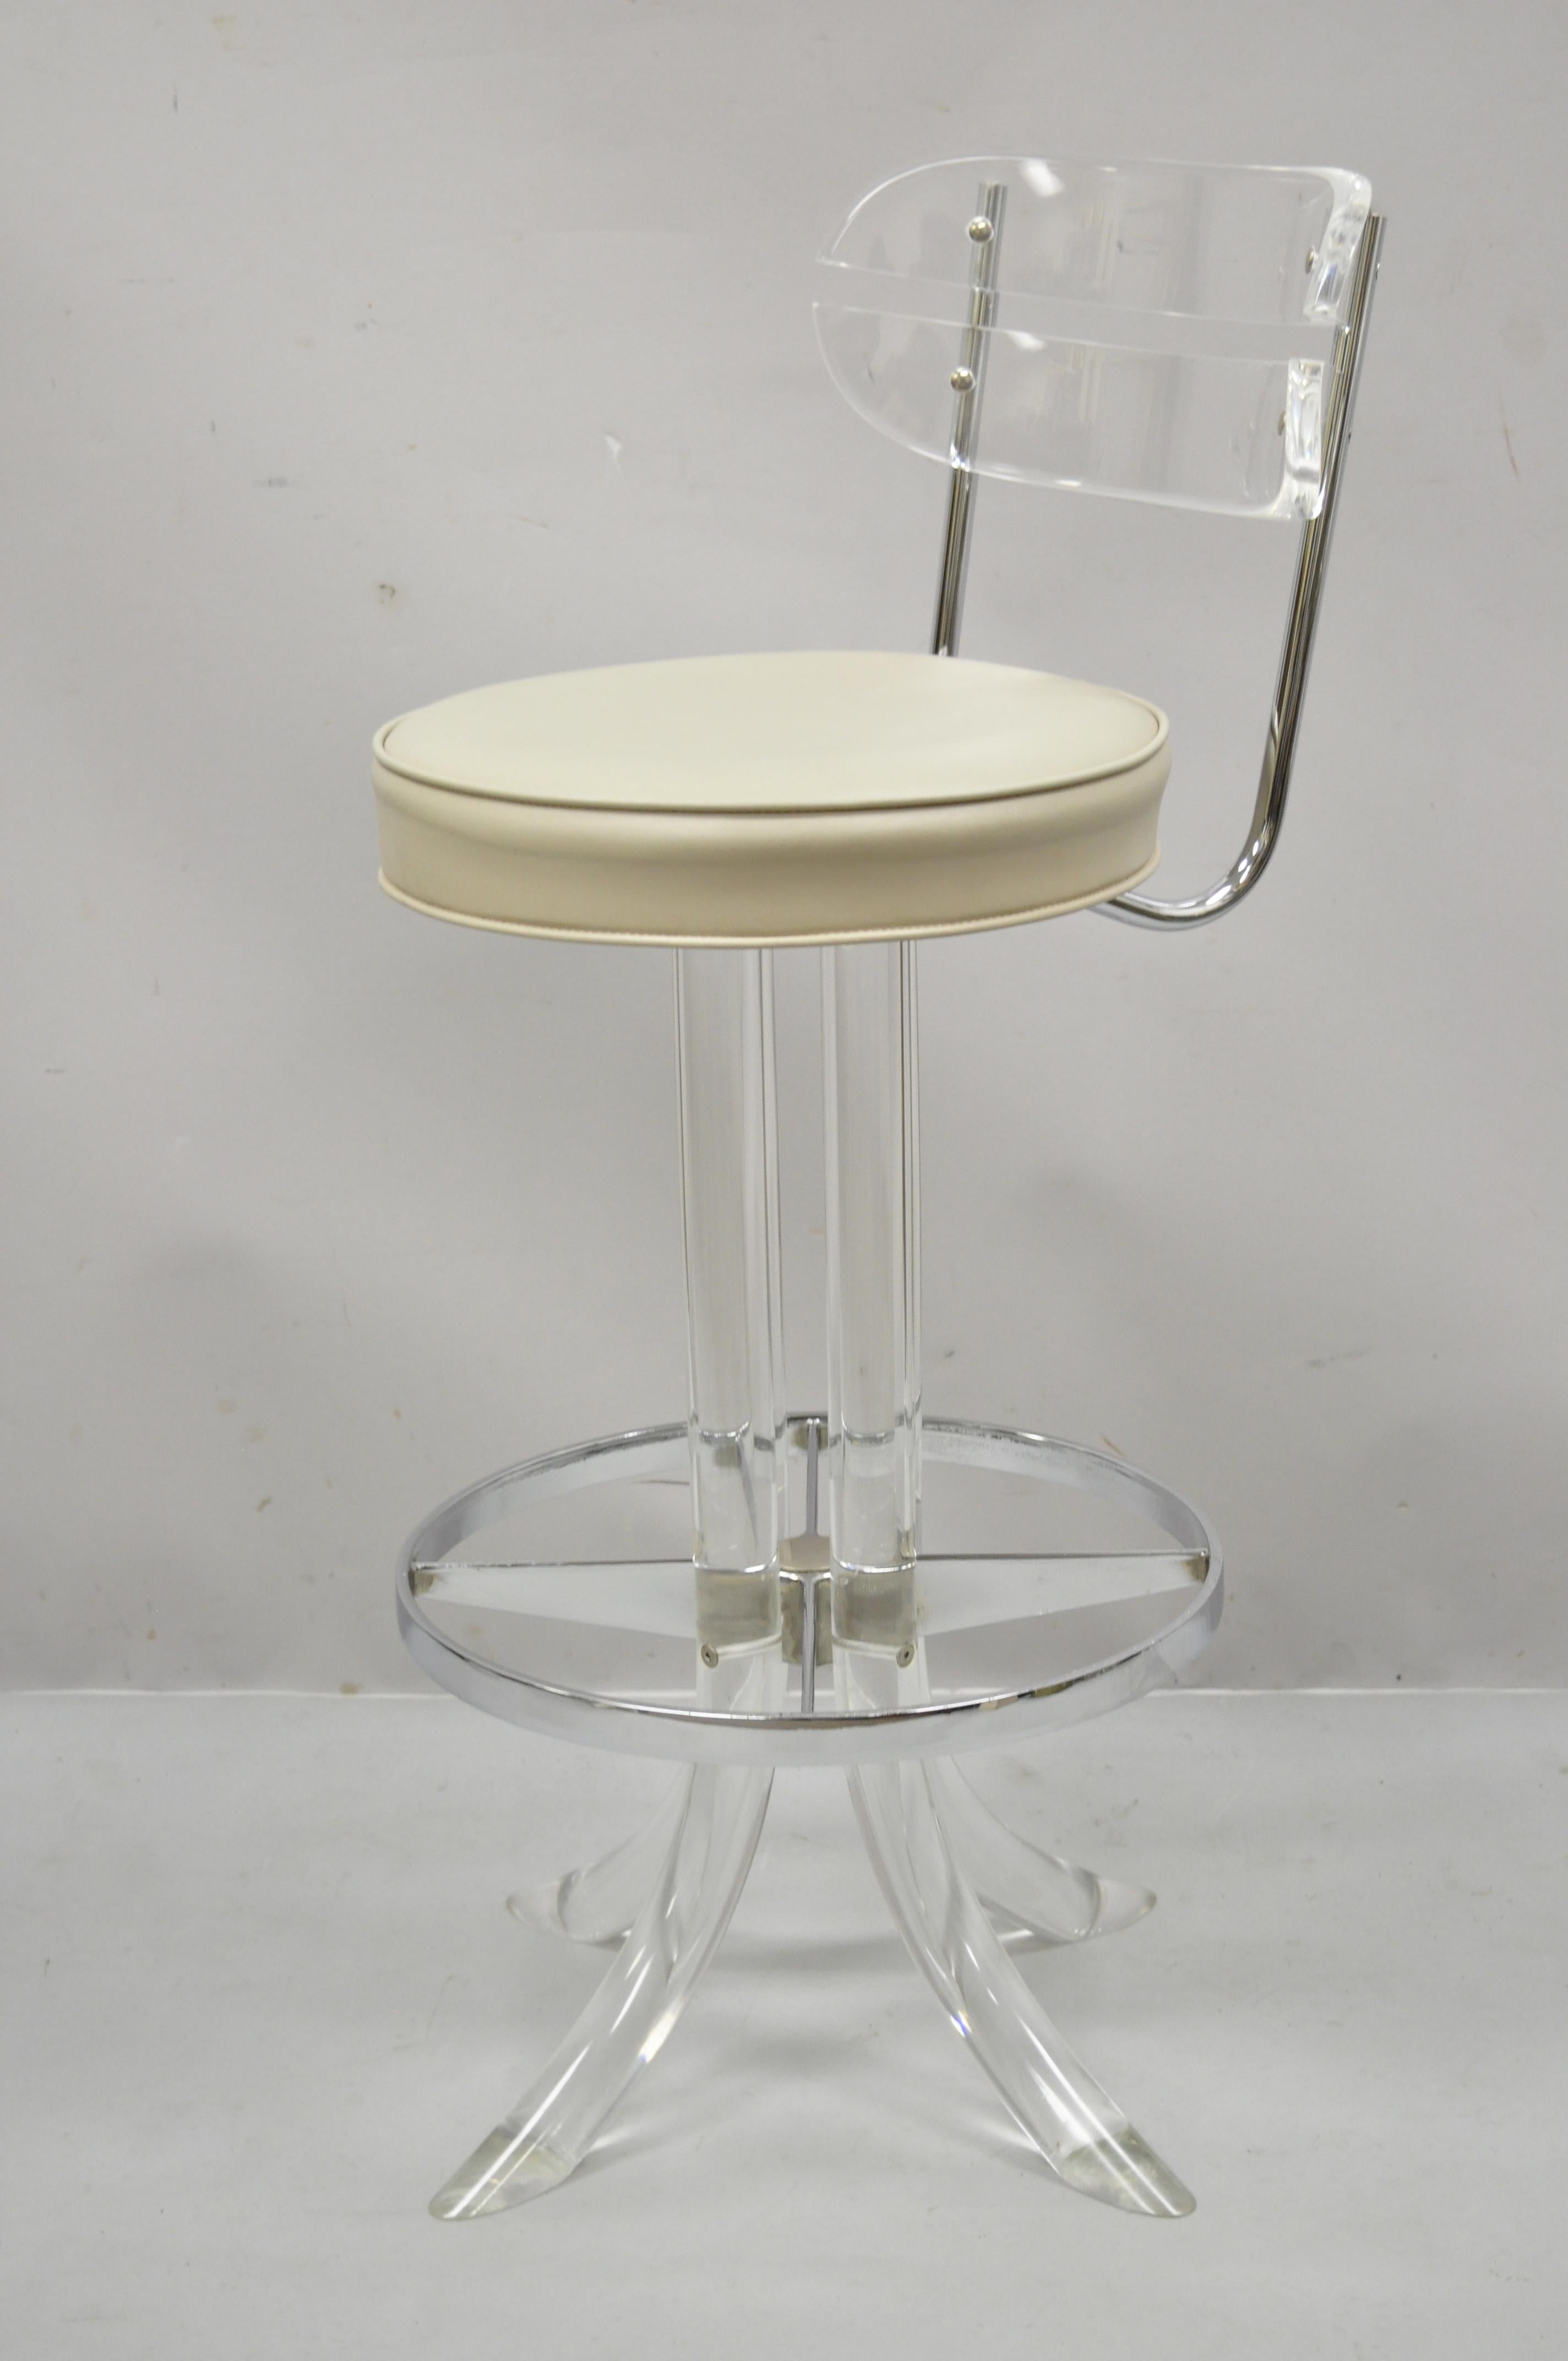 Vintage Hill Manufacturing Corp. Lucite swivel seat tusk faux bamboo barstools after Charles Hollis Jones - Set of 3. Item features swivel seat, bent lucite backs, lucite 